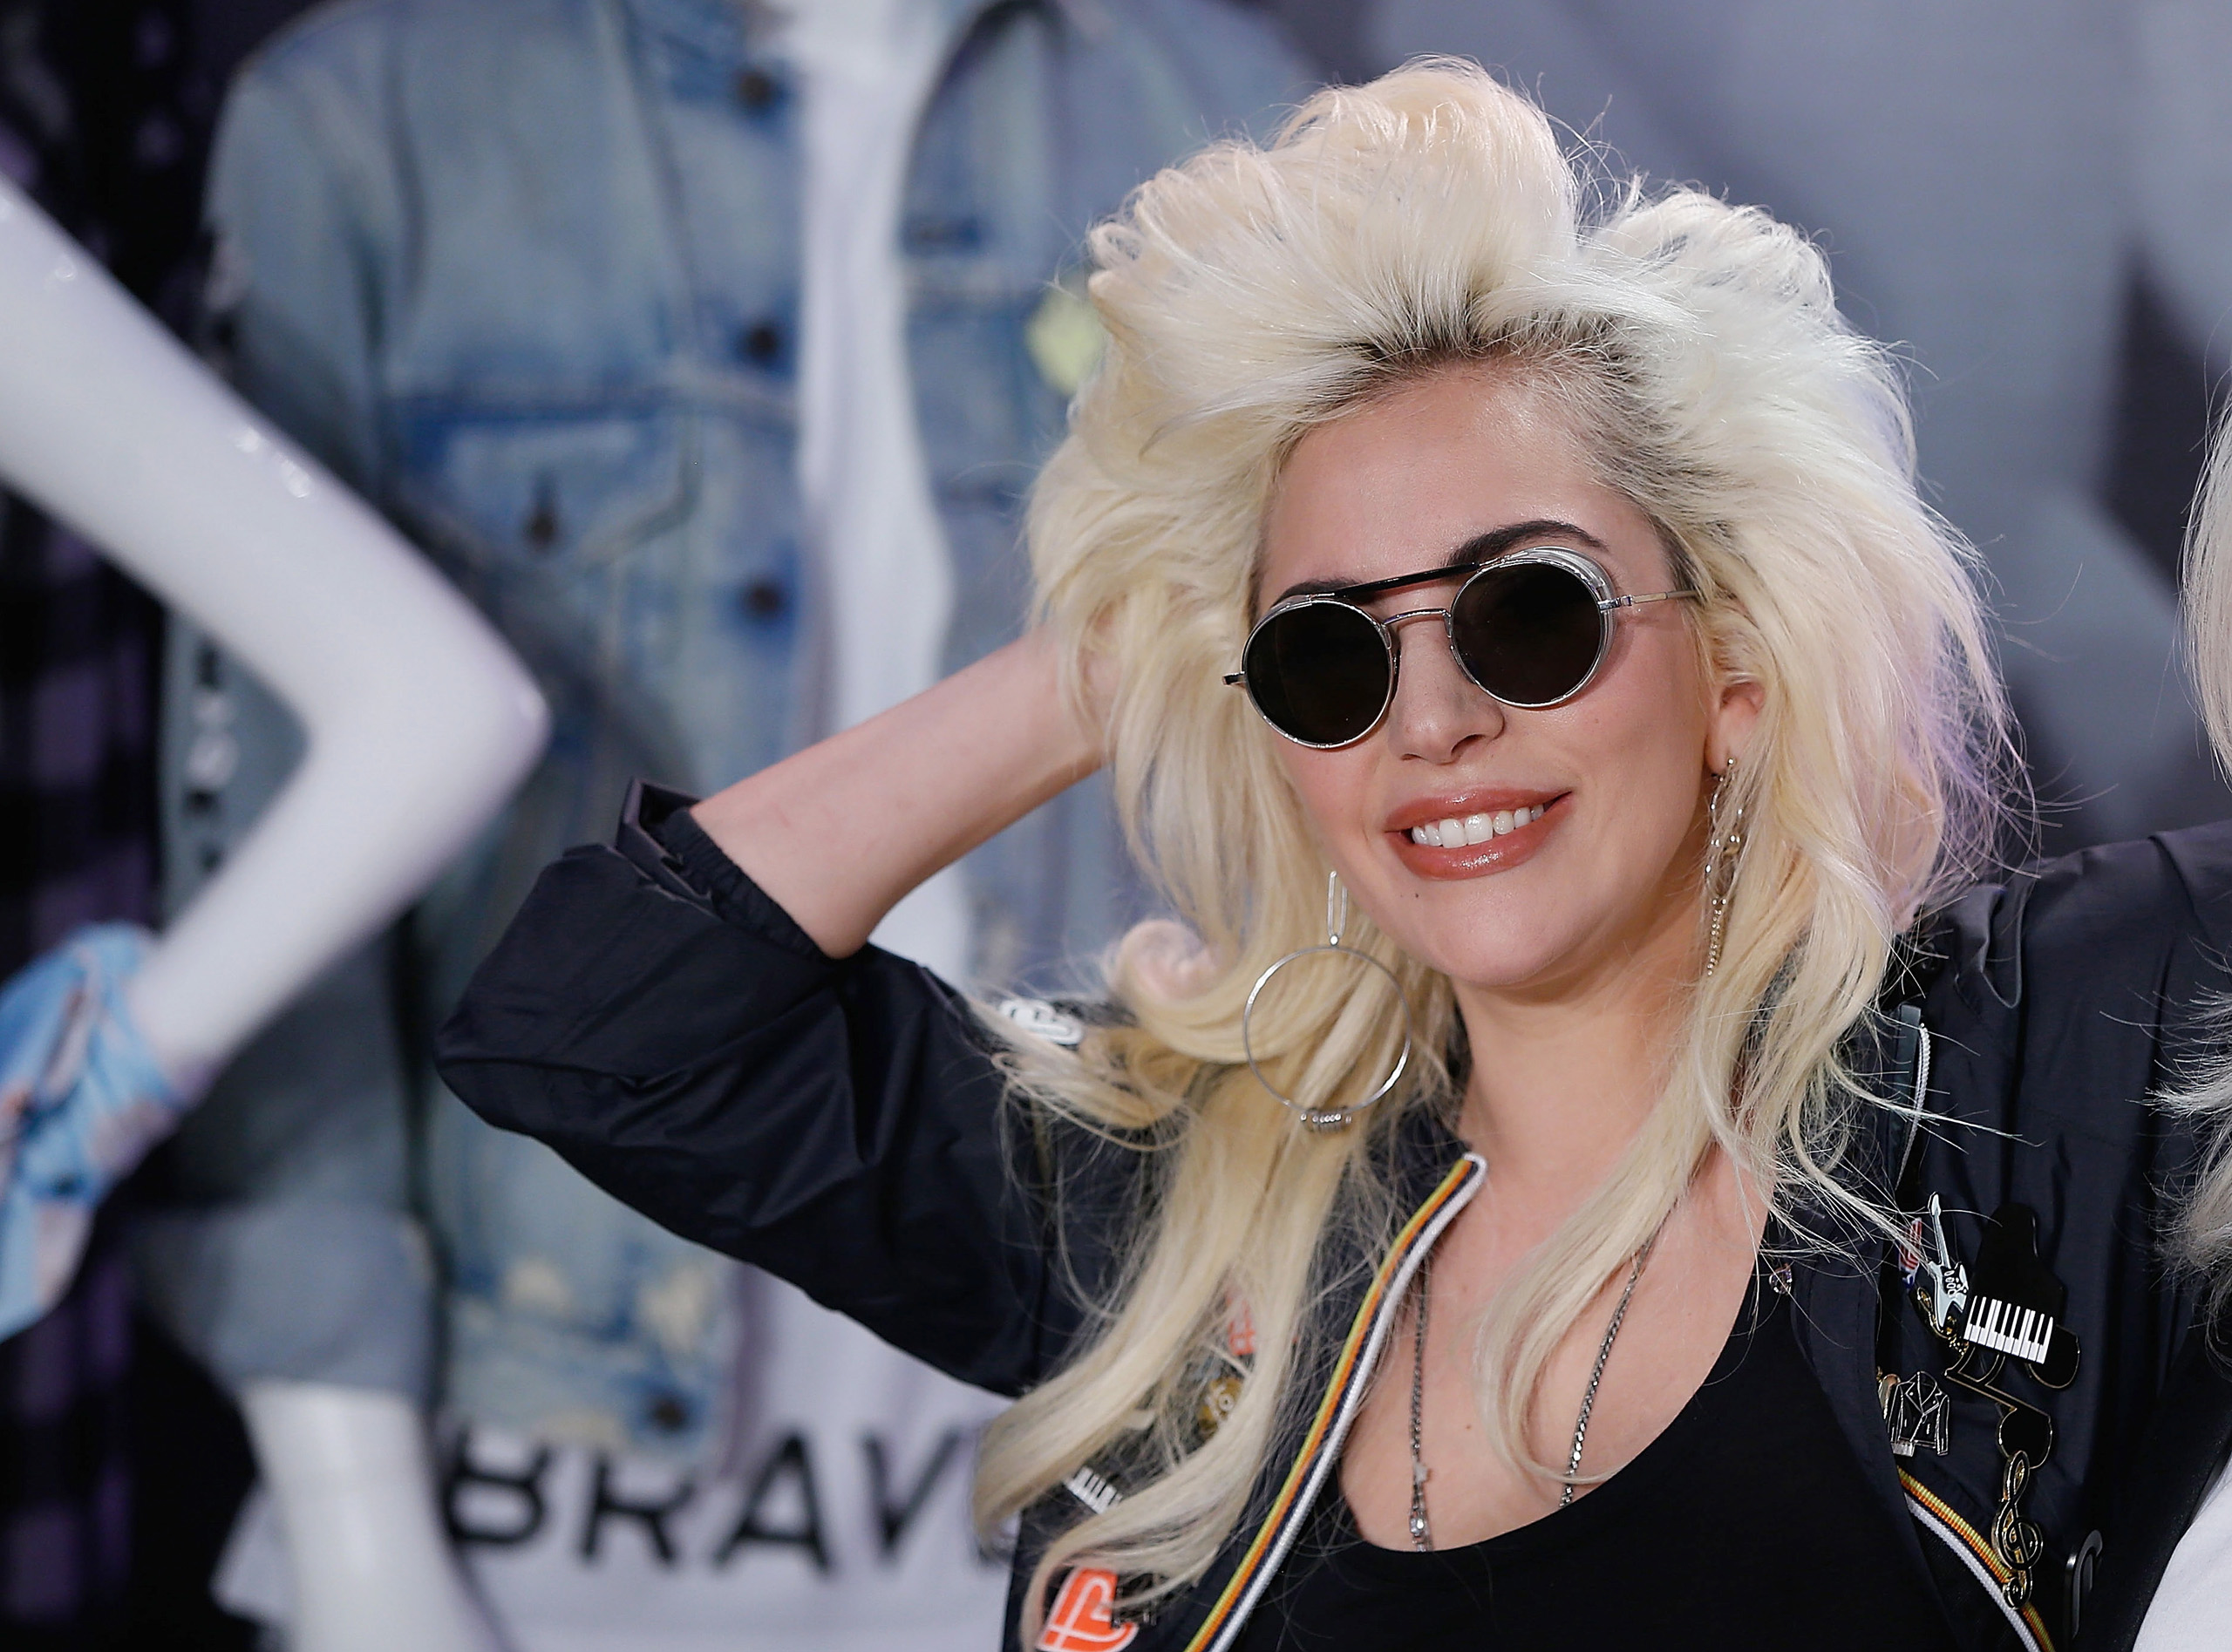 Lady Gaga Launches Love Bravery Collection At Macy's Herald Square